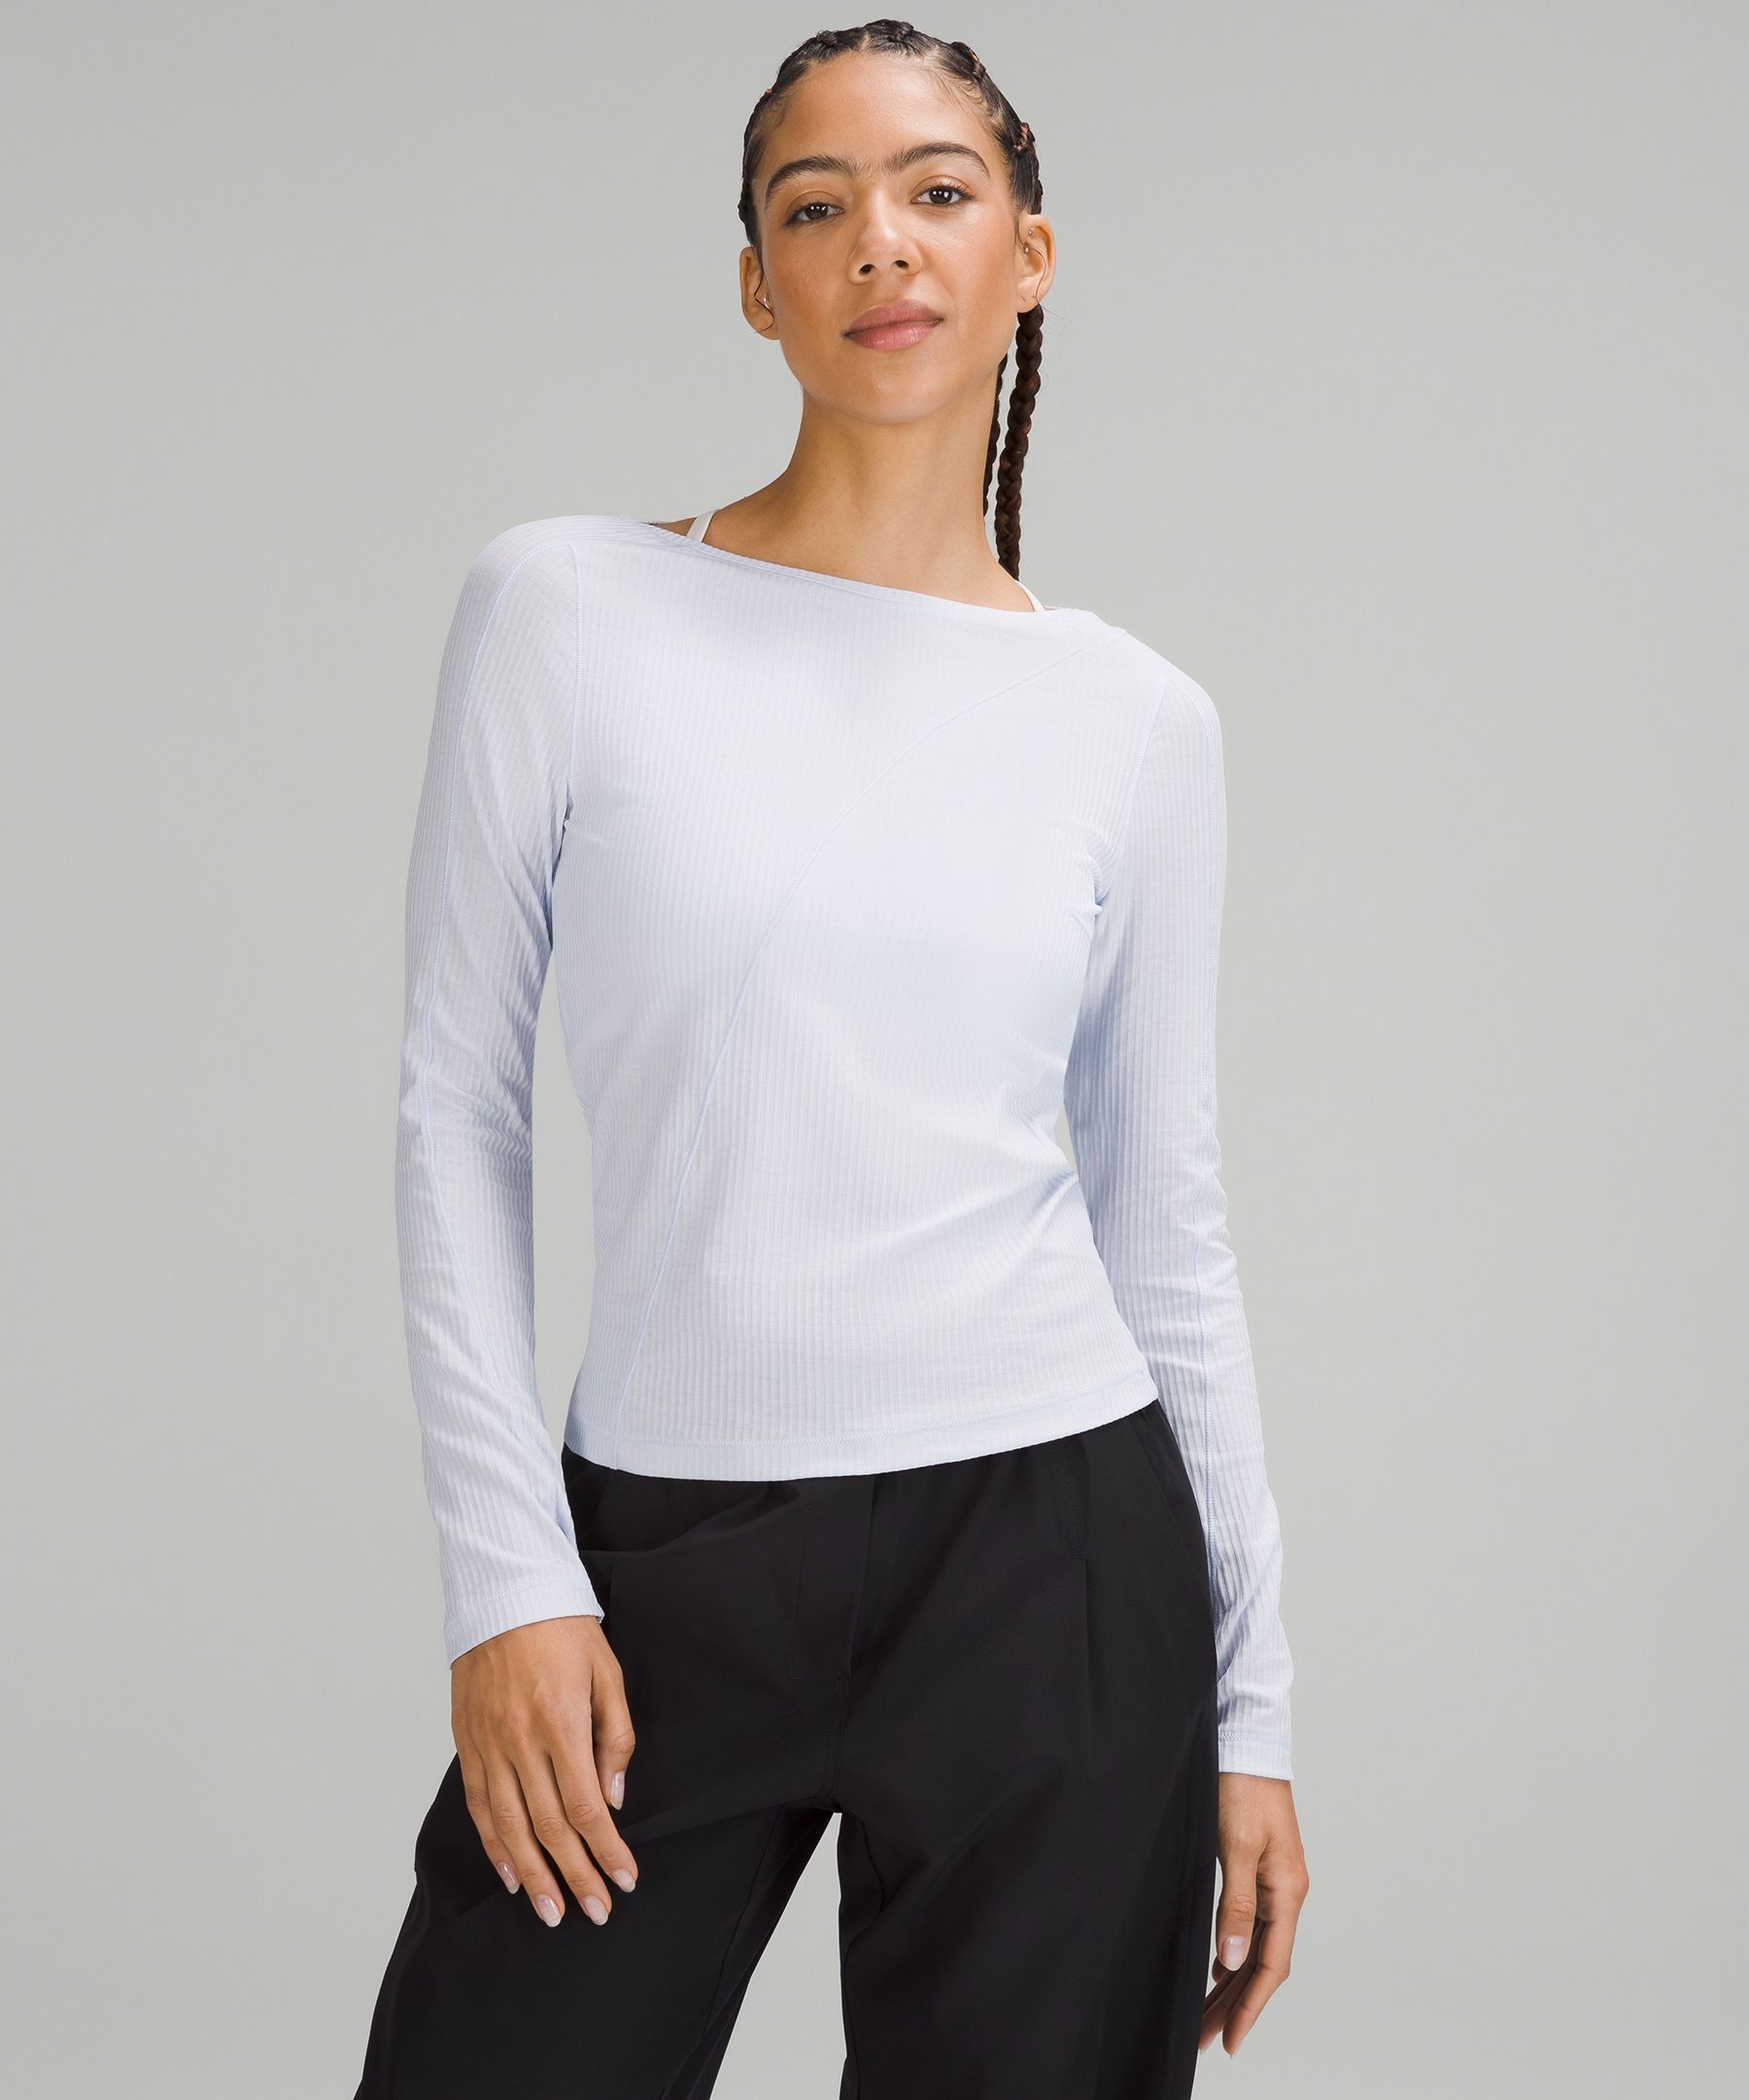 COTTONIQUE Women's Long Sleeve ribbed tee